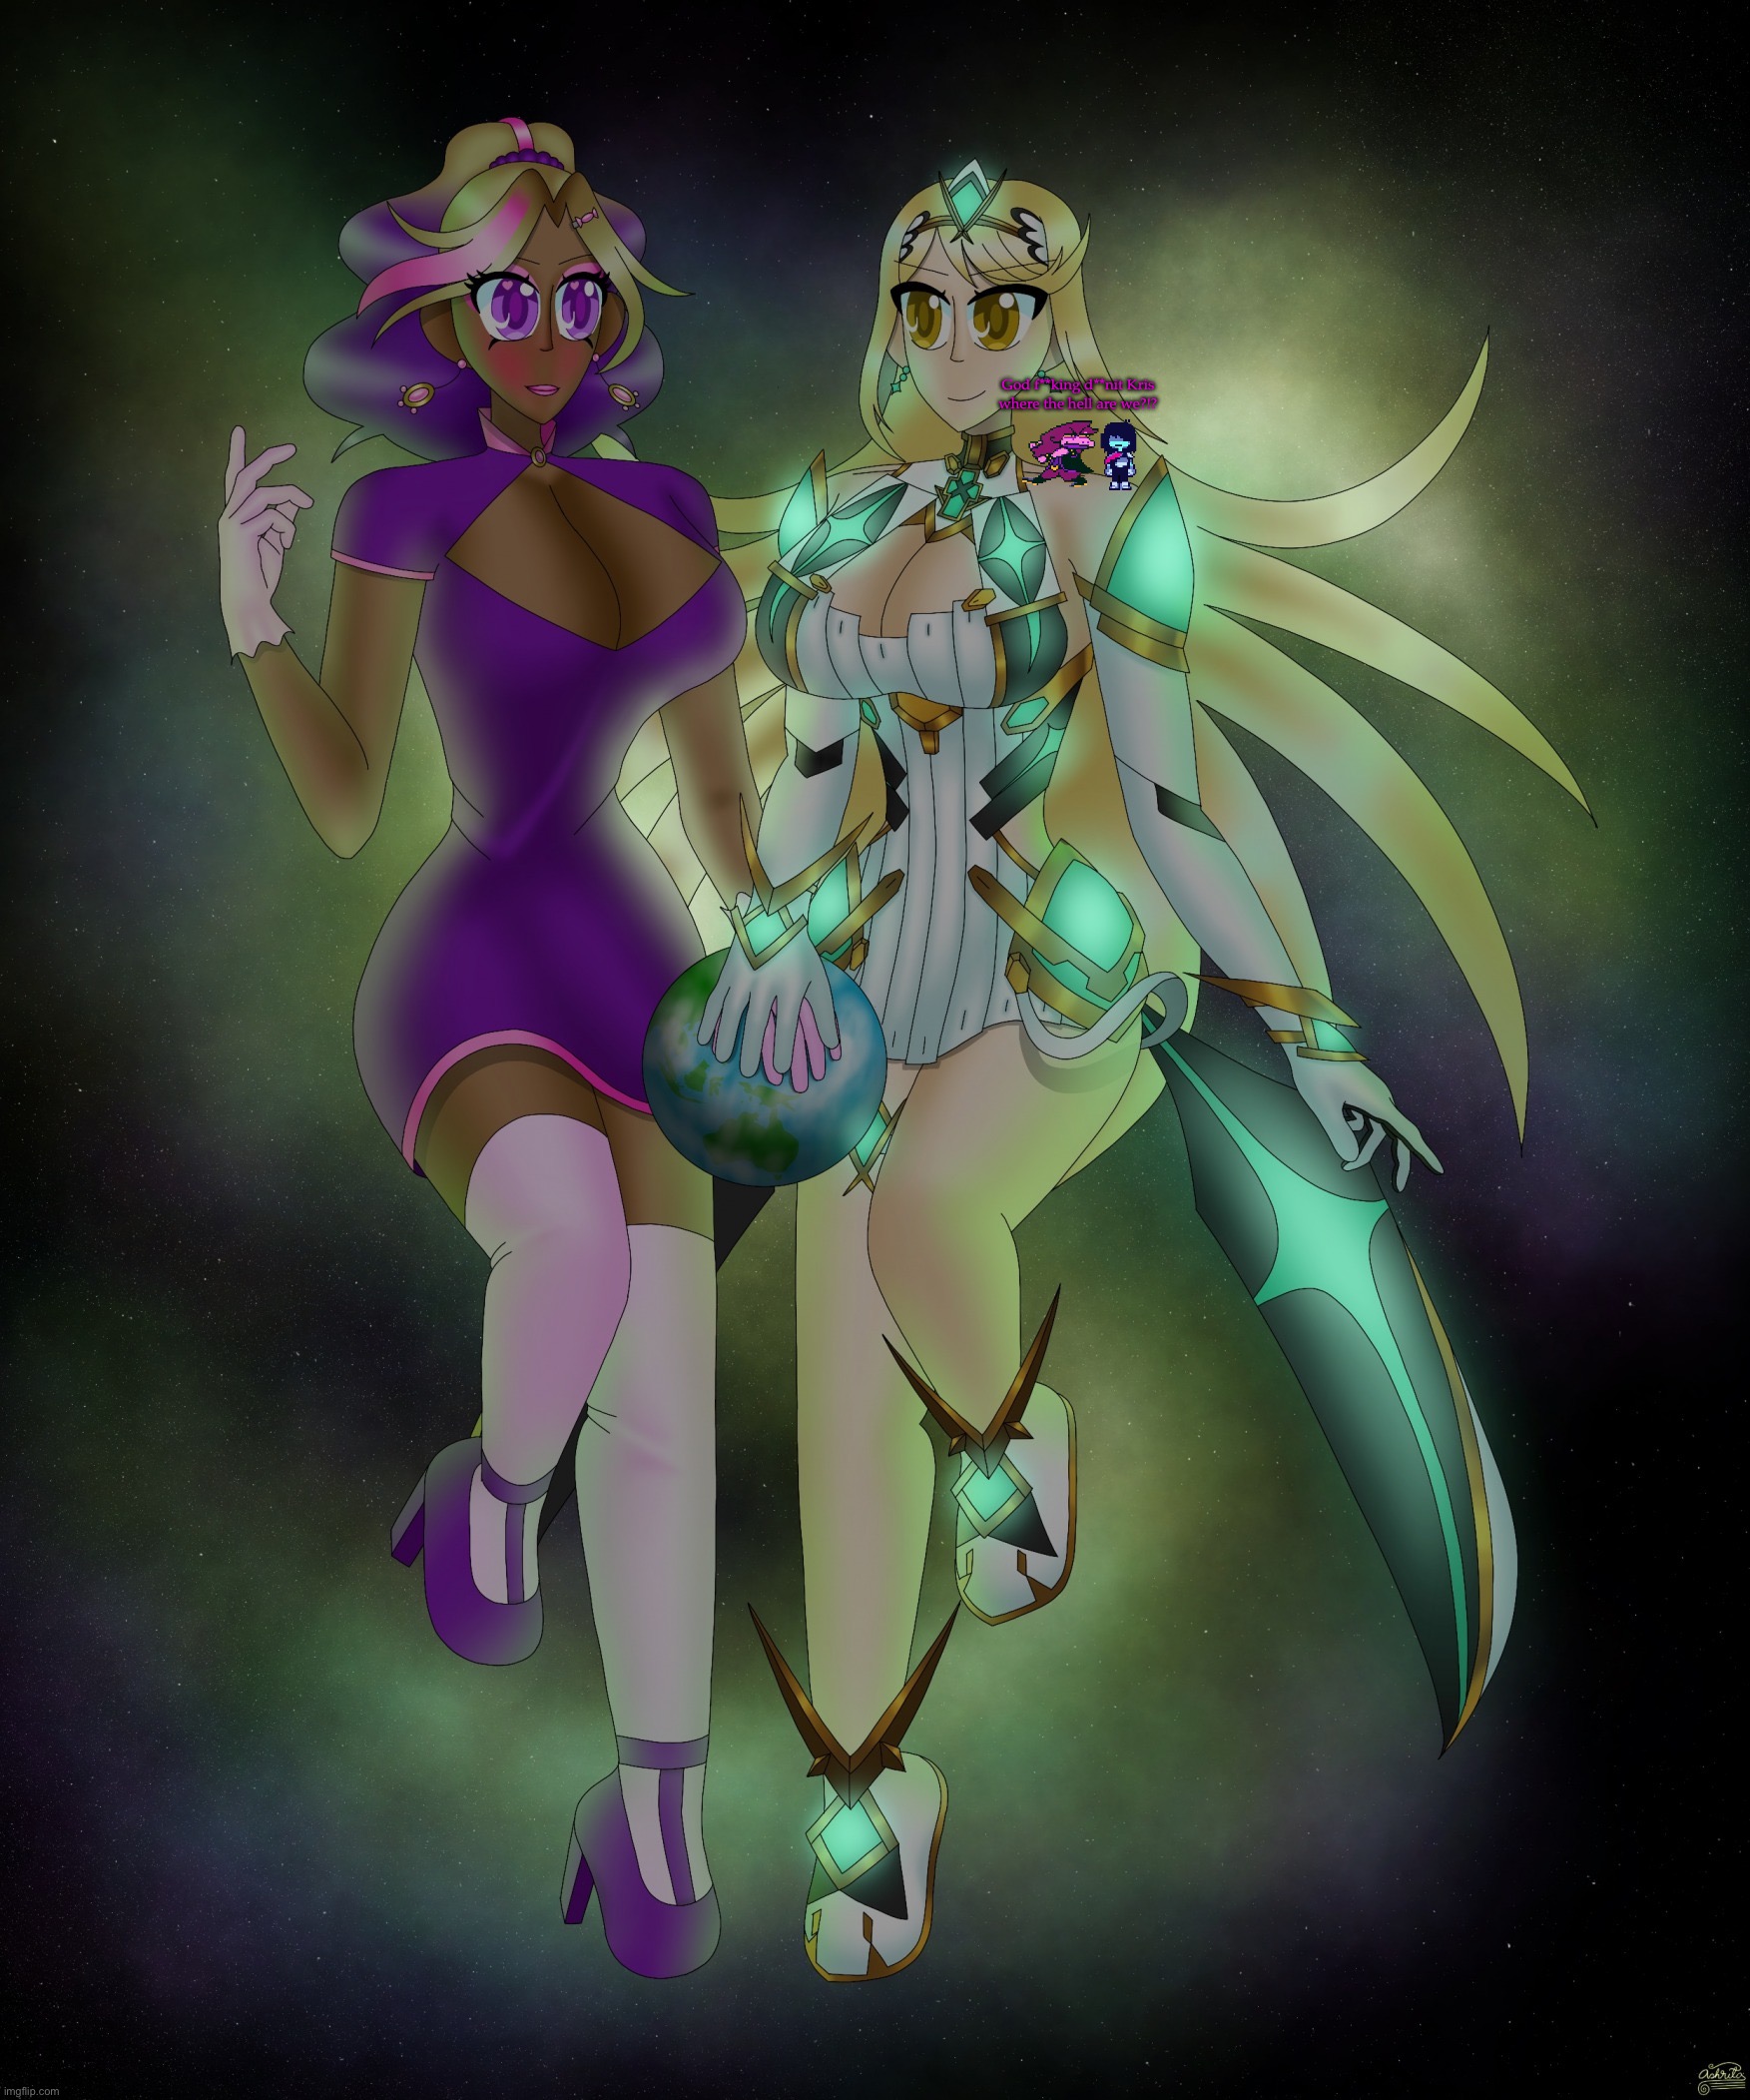 Kashiko Murasaki and Mythra | God f**king d**nit Kris where the hell are we?!? | image tagged in kashiko murasaki and mythra,kris | made w/ Imgflip meme maker